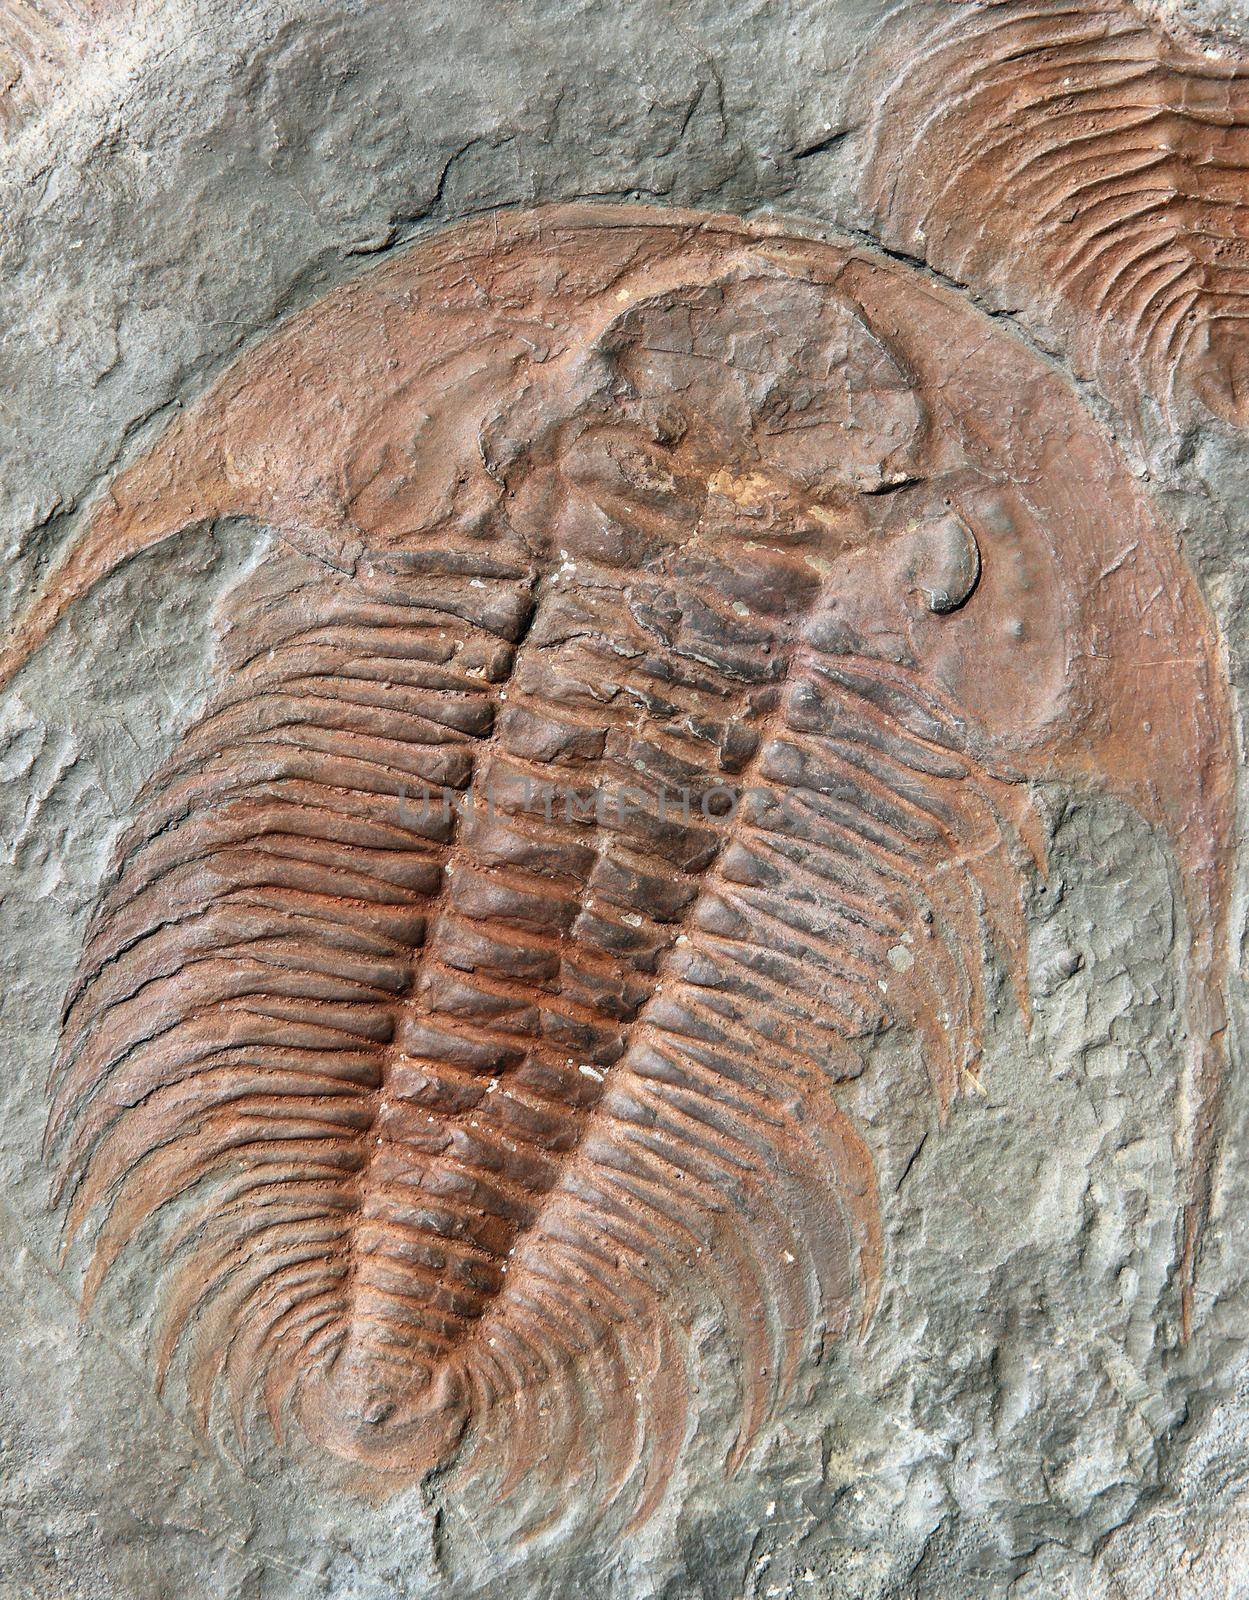 Fossil of a trilobites from the early ordovician period found in Czech Republic by Mibuch